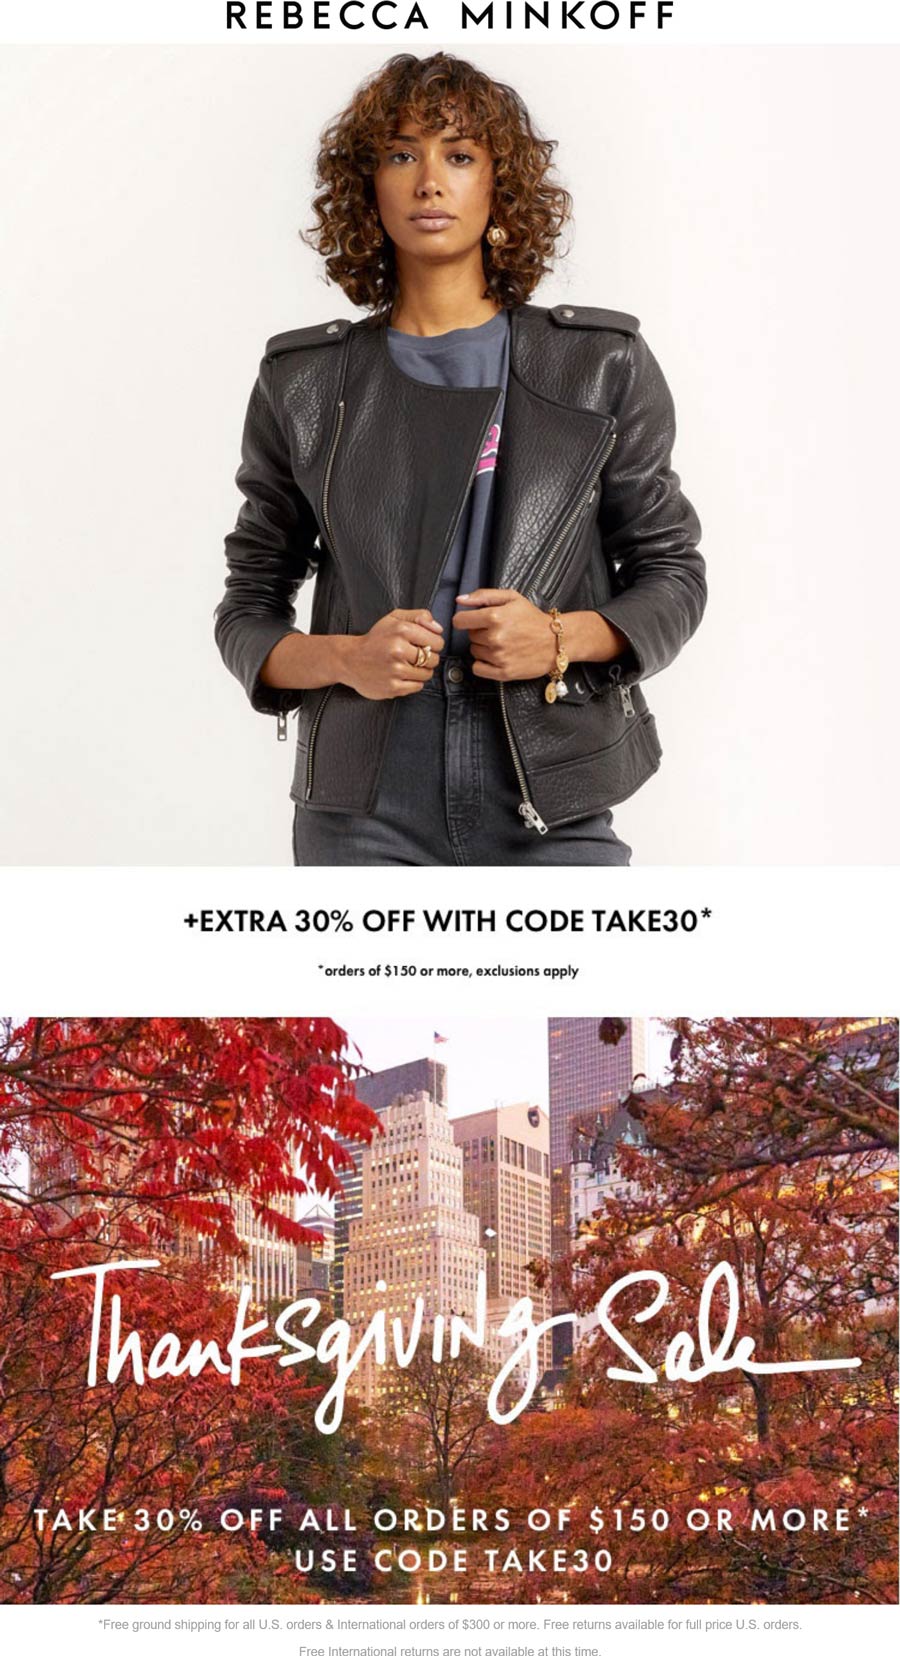 Rebecca Minkoff stores Coupon  Extra 30% off $150 at Rebecca Minkoff via promo code TAKE30 #rebeccaminkoff 